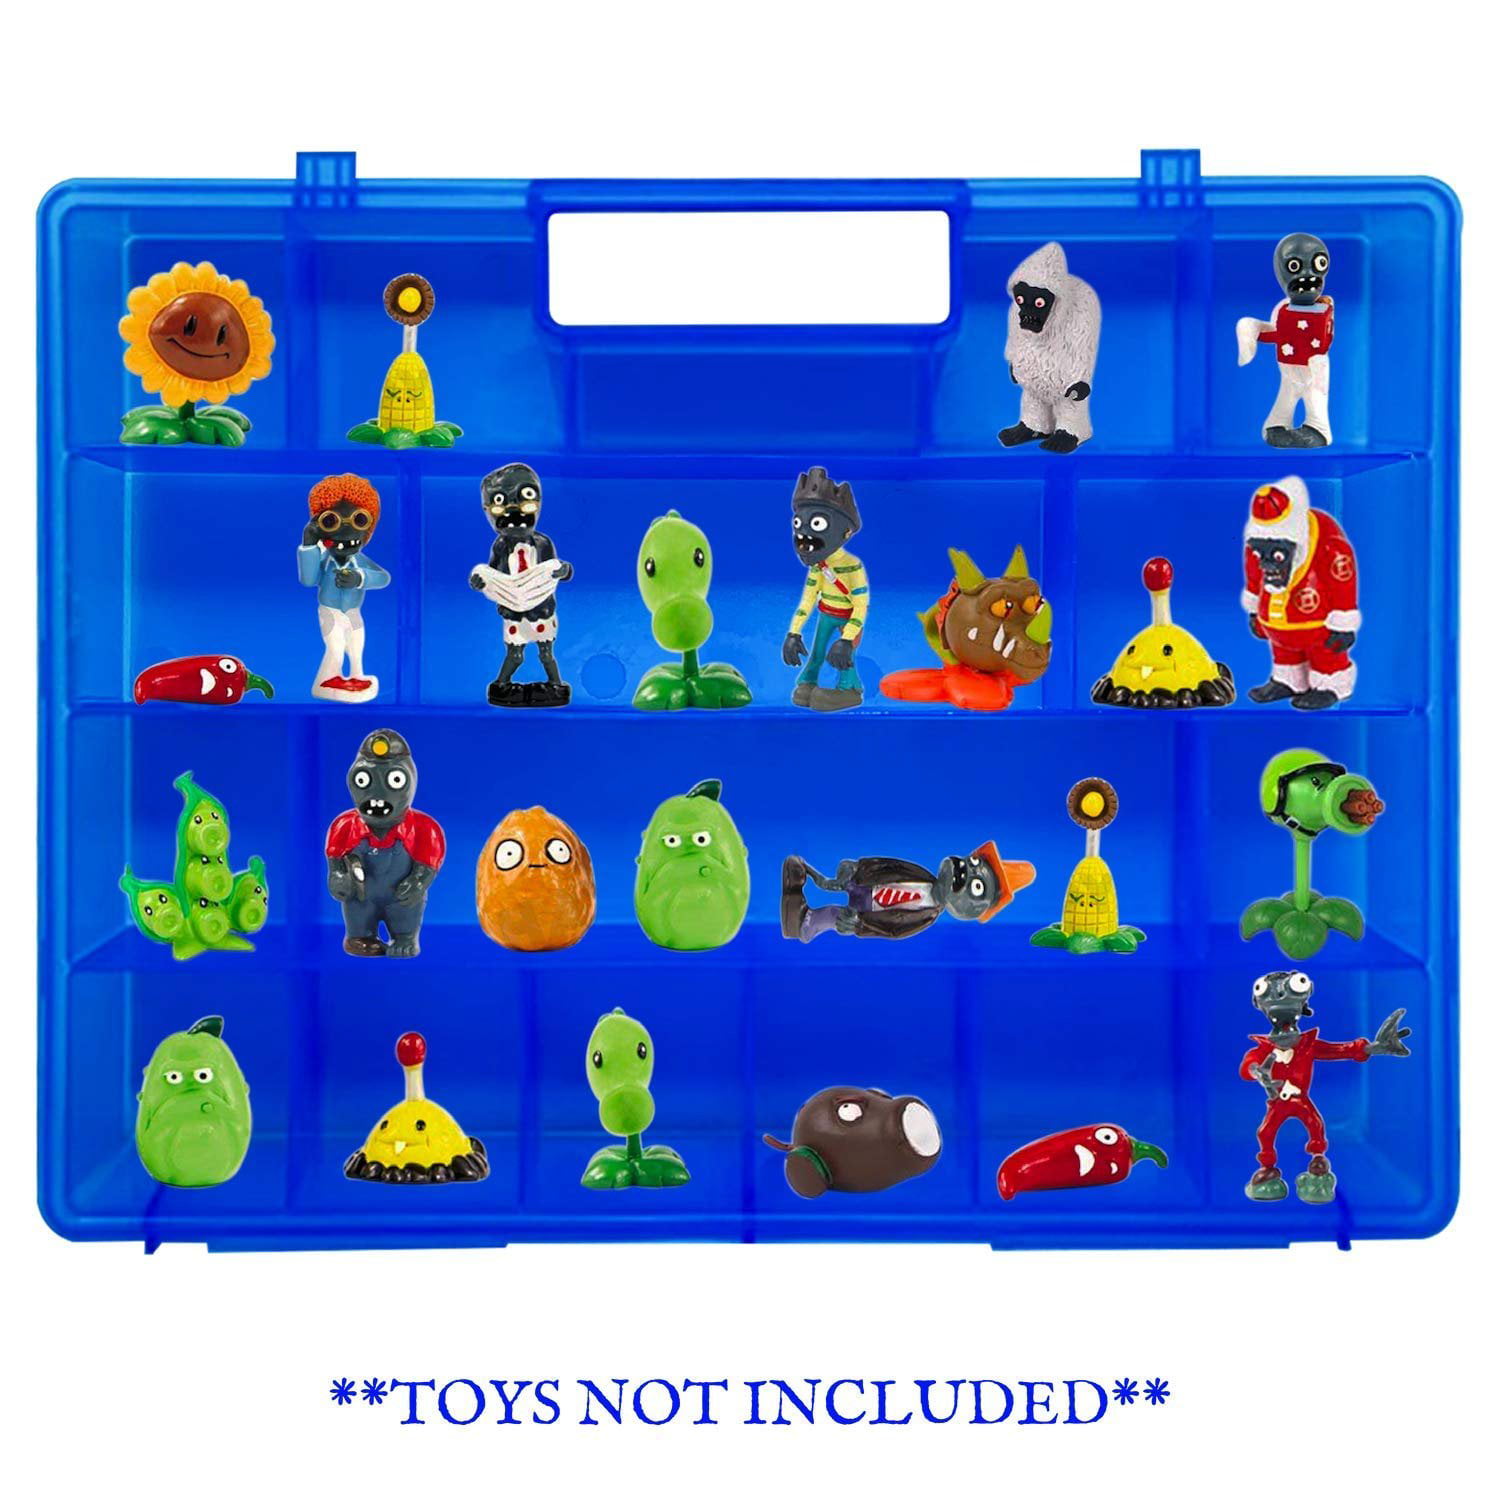 Blue Life Made Better Plants vs Zombies Storage Case Carrying Case for Toy Figurines and Accessories 